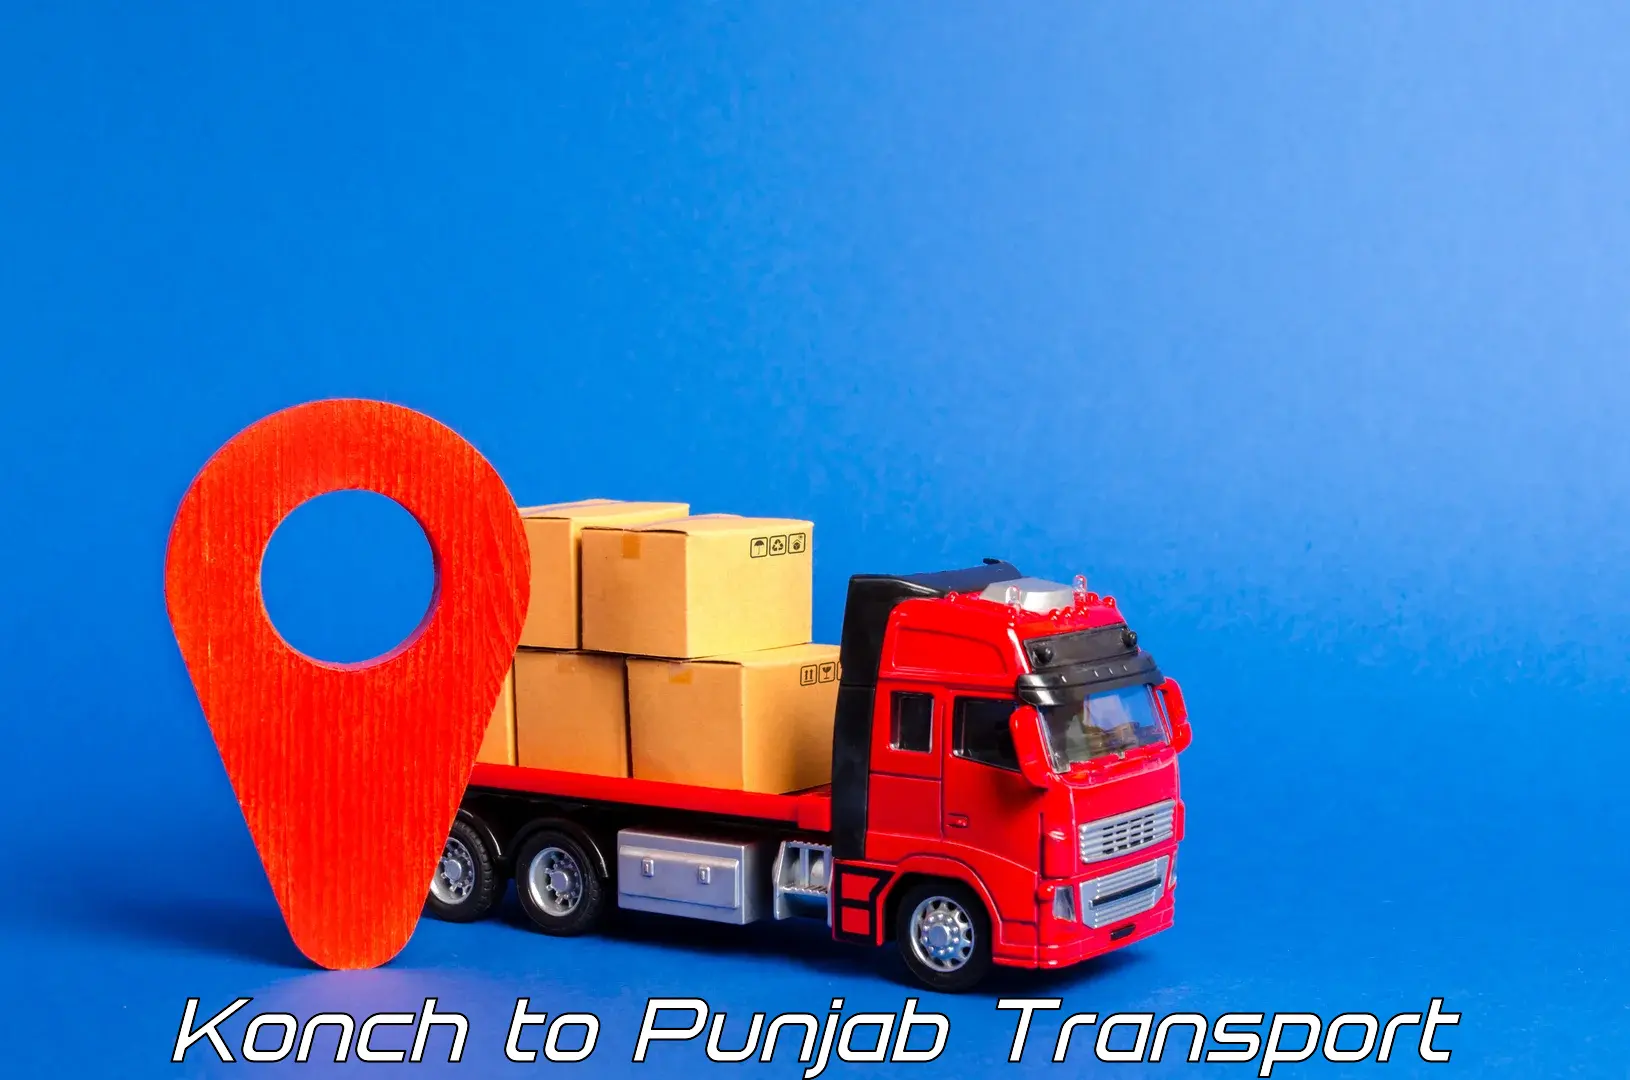 All India transport service Konch to Pathankot